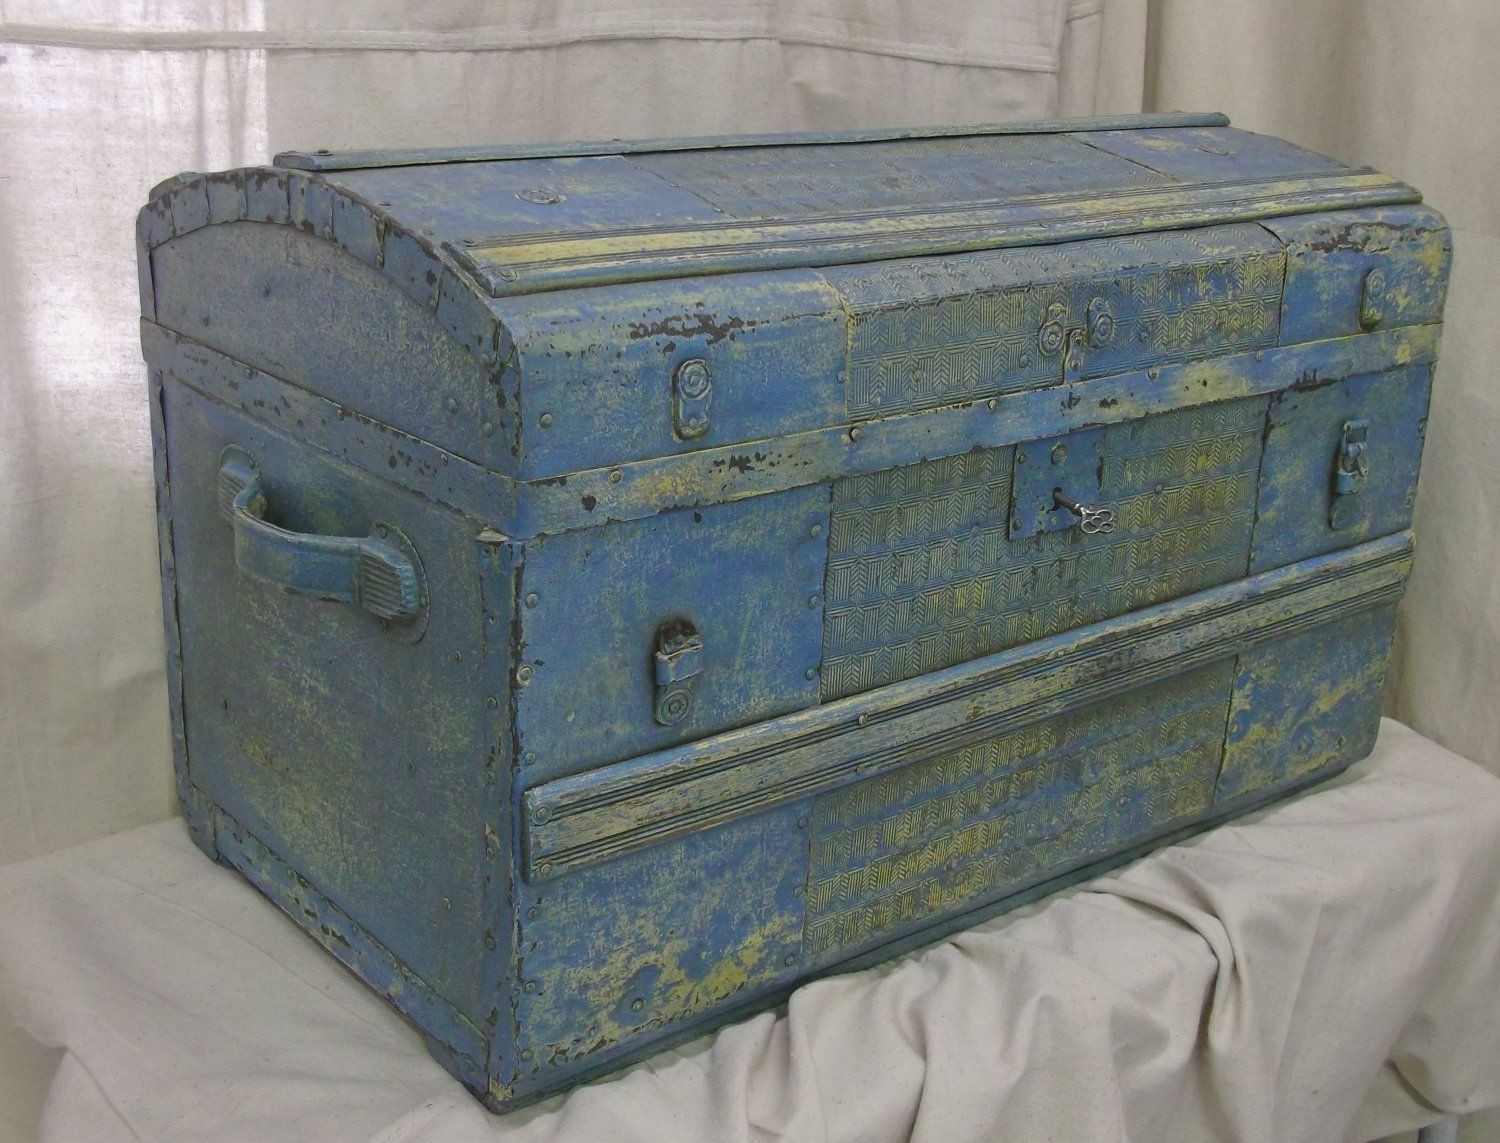 Painting an old steamer trunk